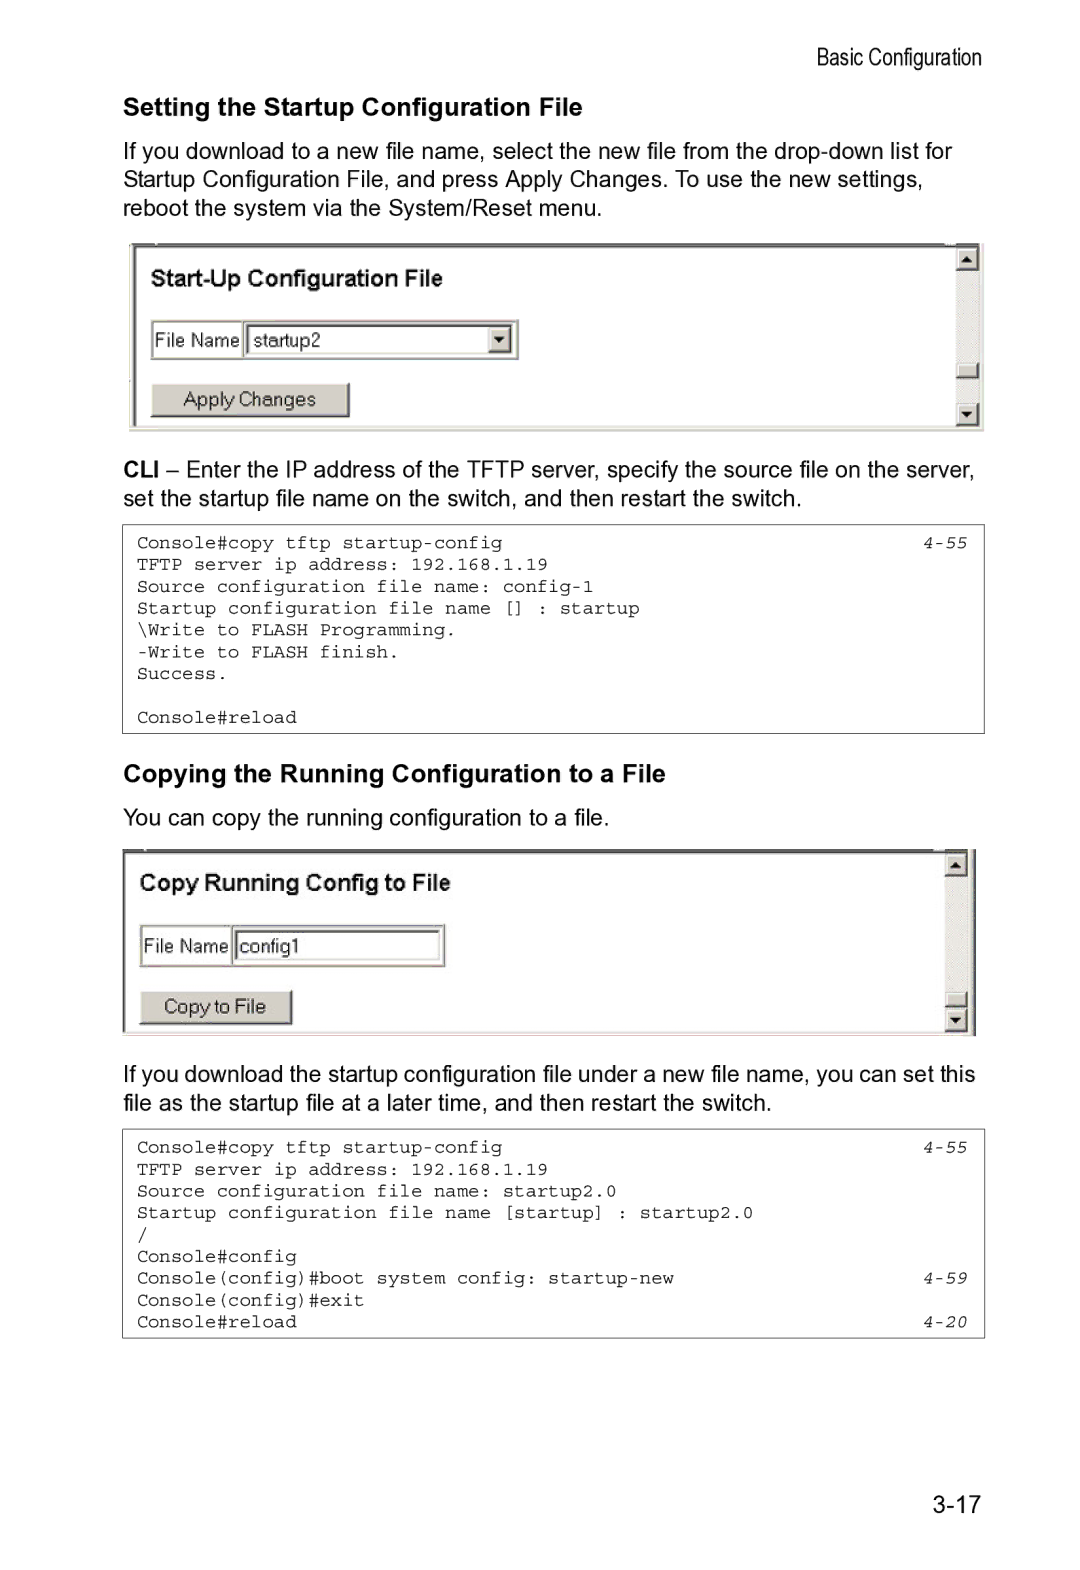 Accton Technology VS4512DC manual Setting the Startup Configuration File, Copying the Running Configuration to a File 